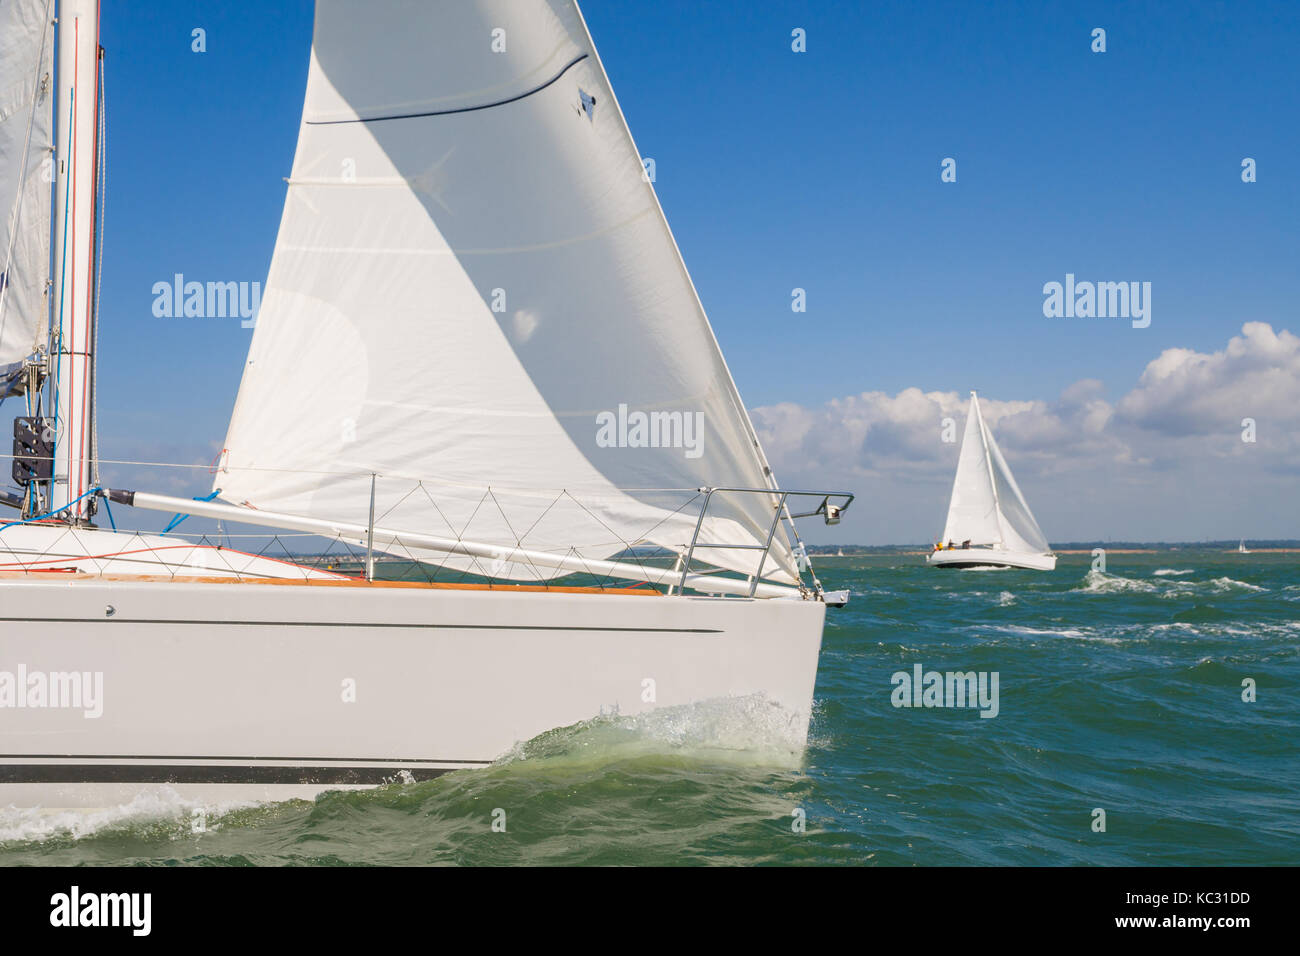 Two beautiful white yachts or sail boats sailing or racing at sea on a bright sunny day Stock Photo